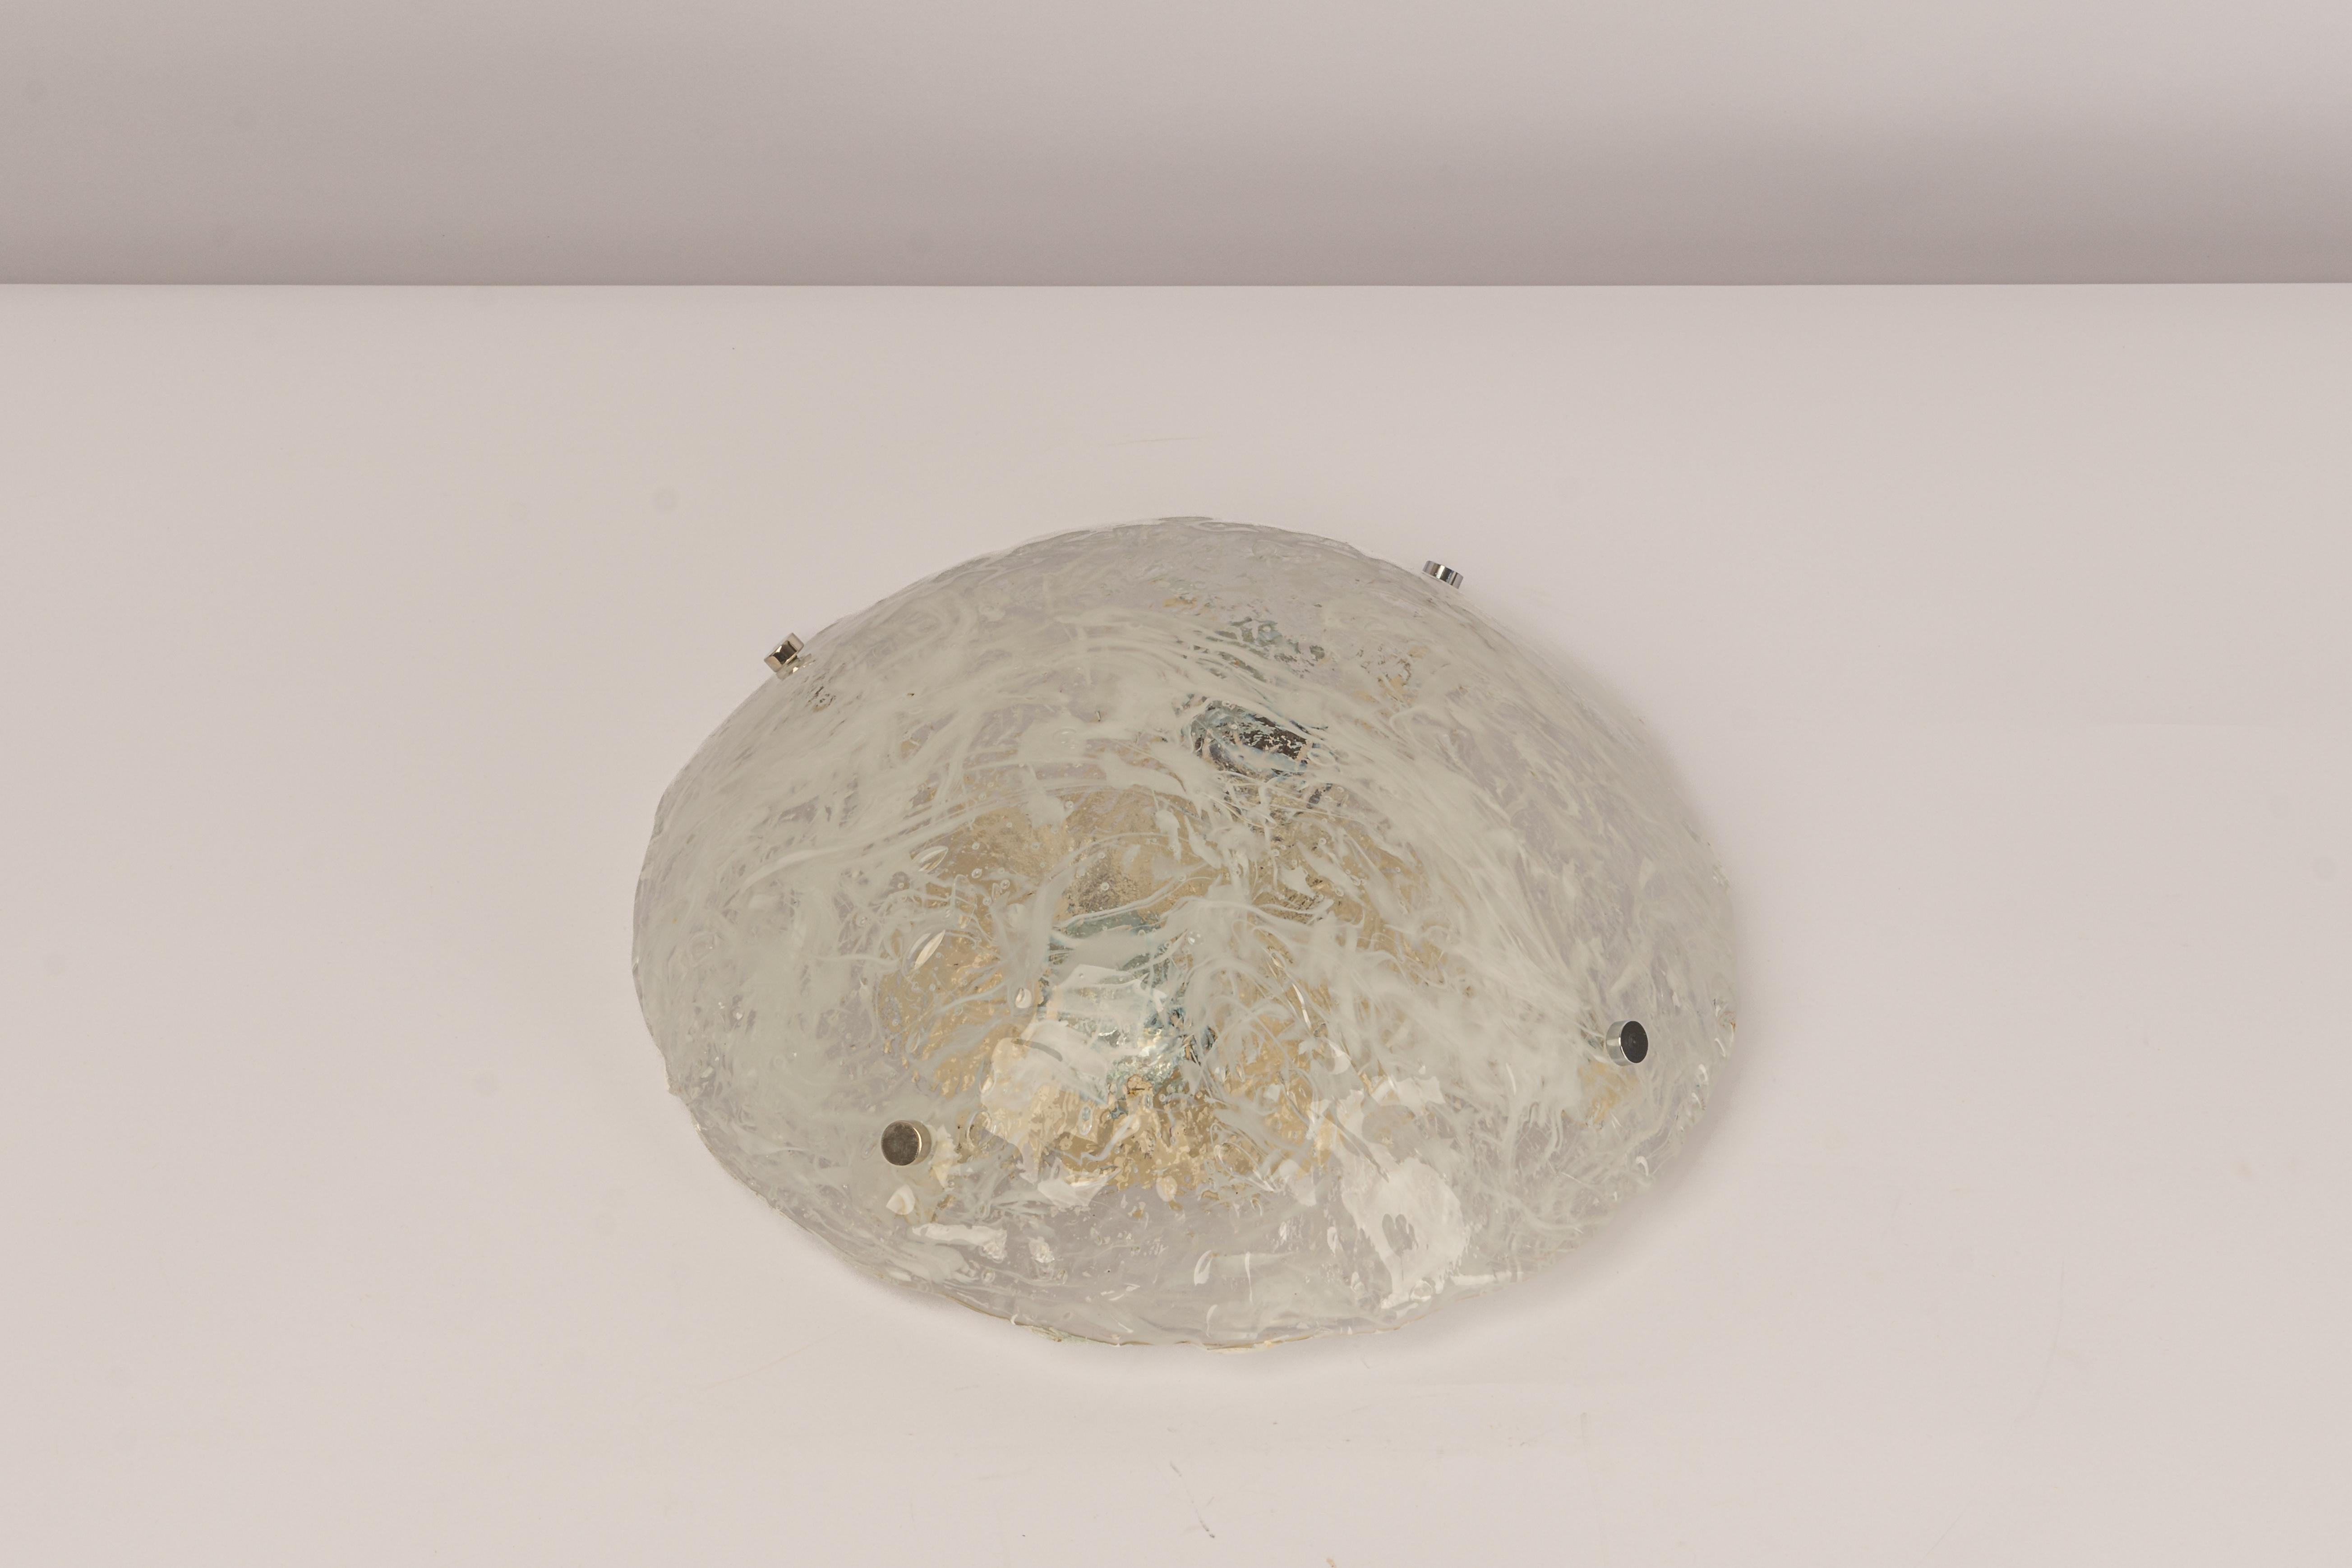 1 of 2 Large Venini Ceiling Lights Attributed to Carlo Scarpa for Venini, 1950s For Sale 4